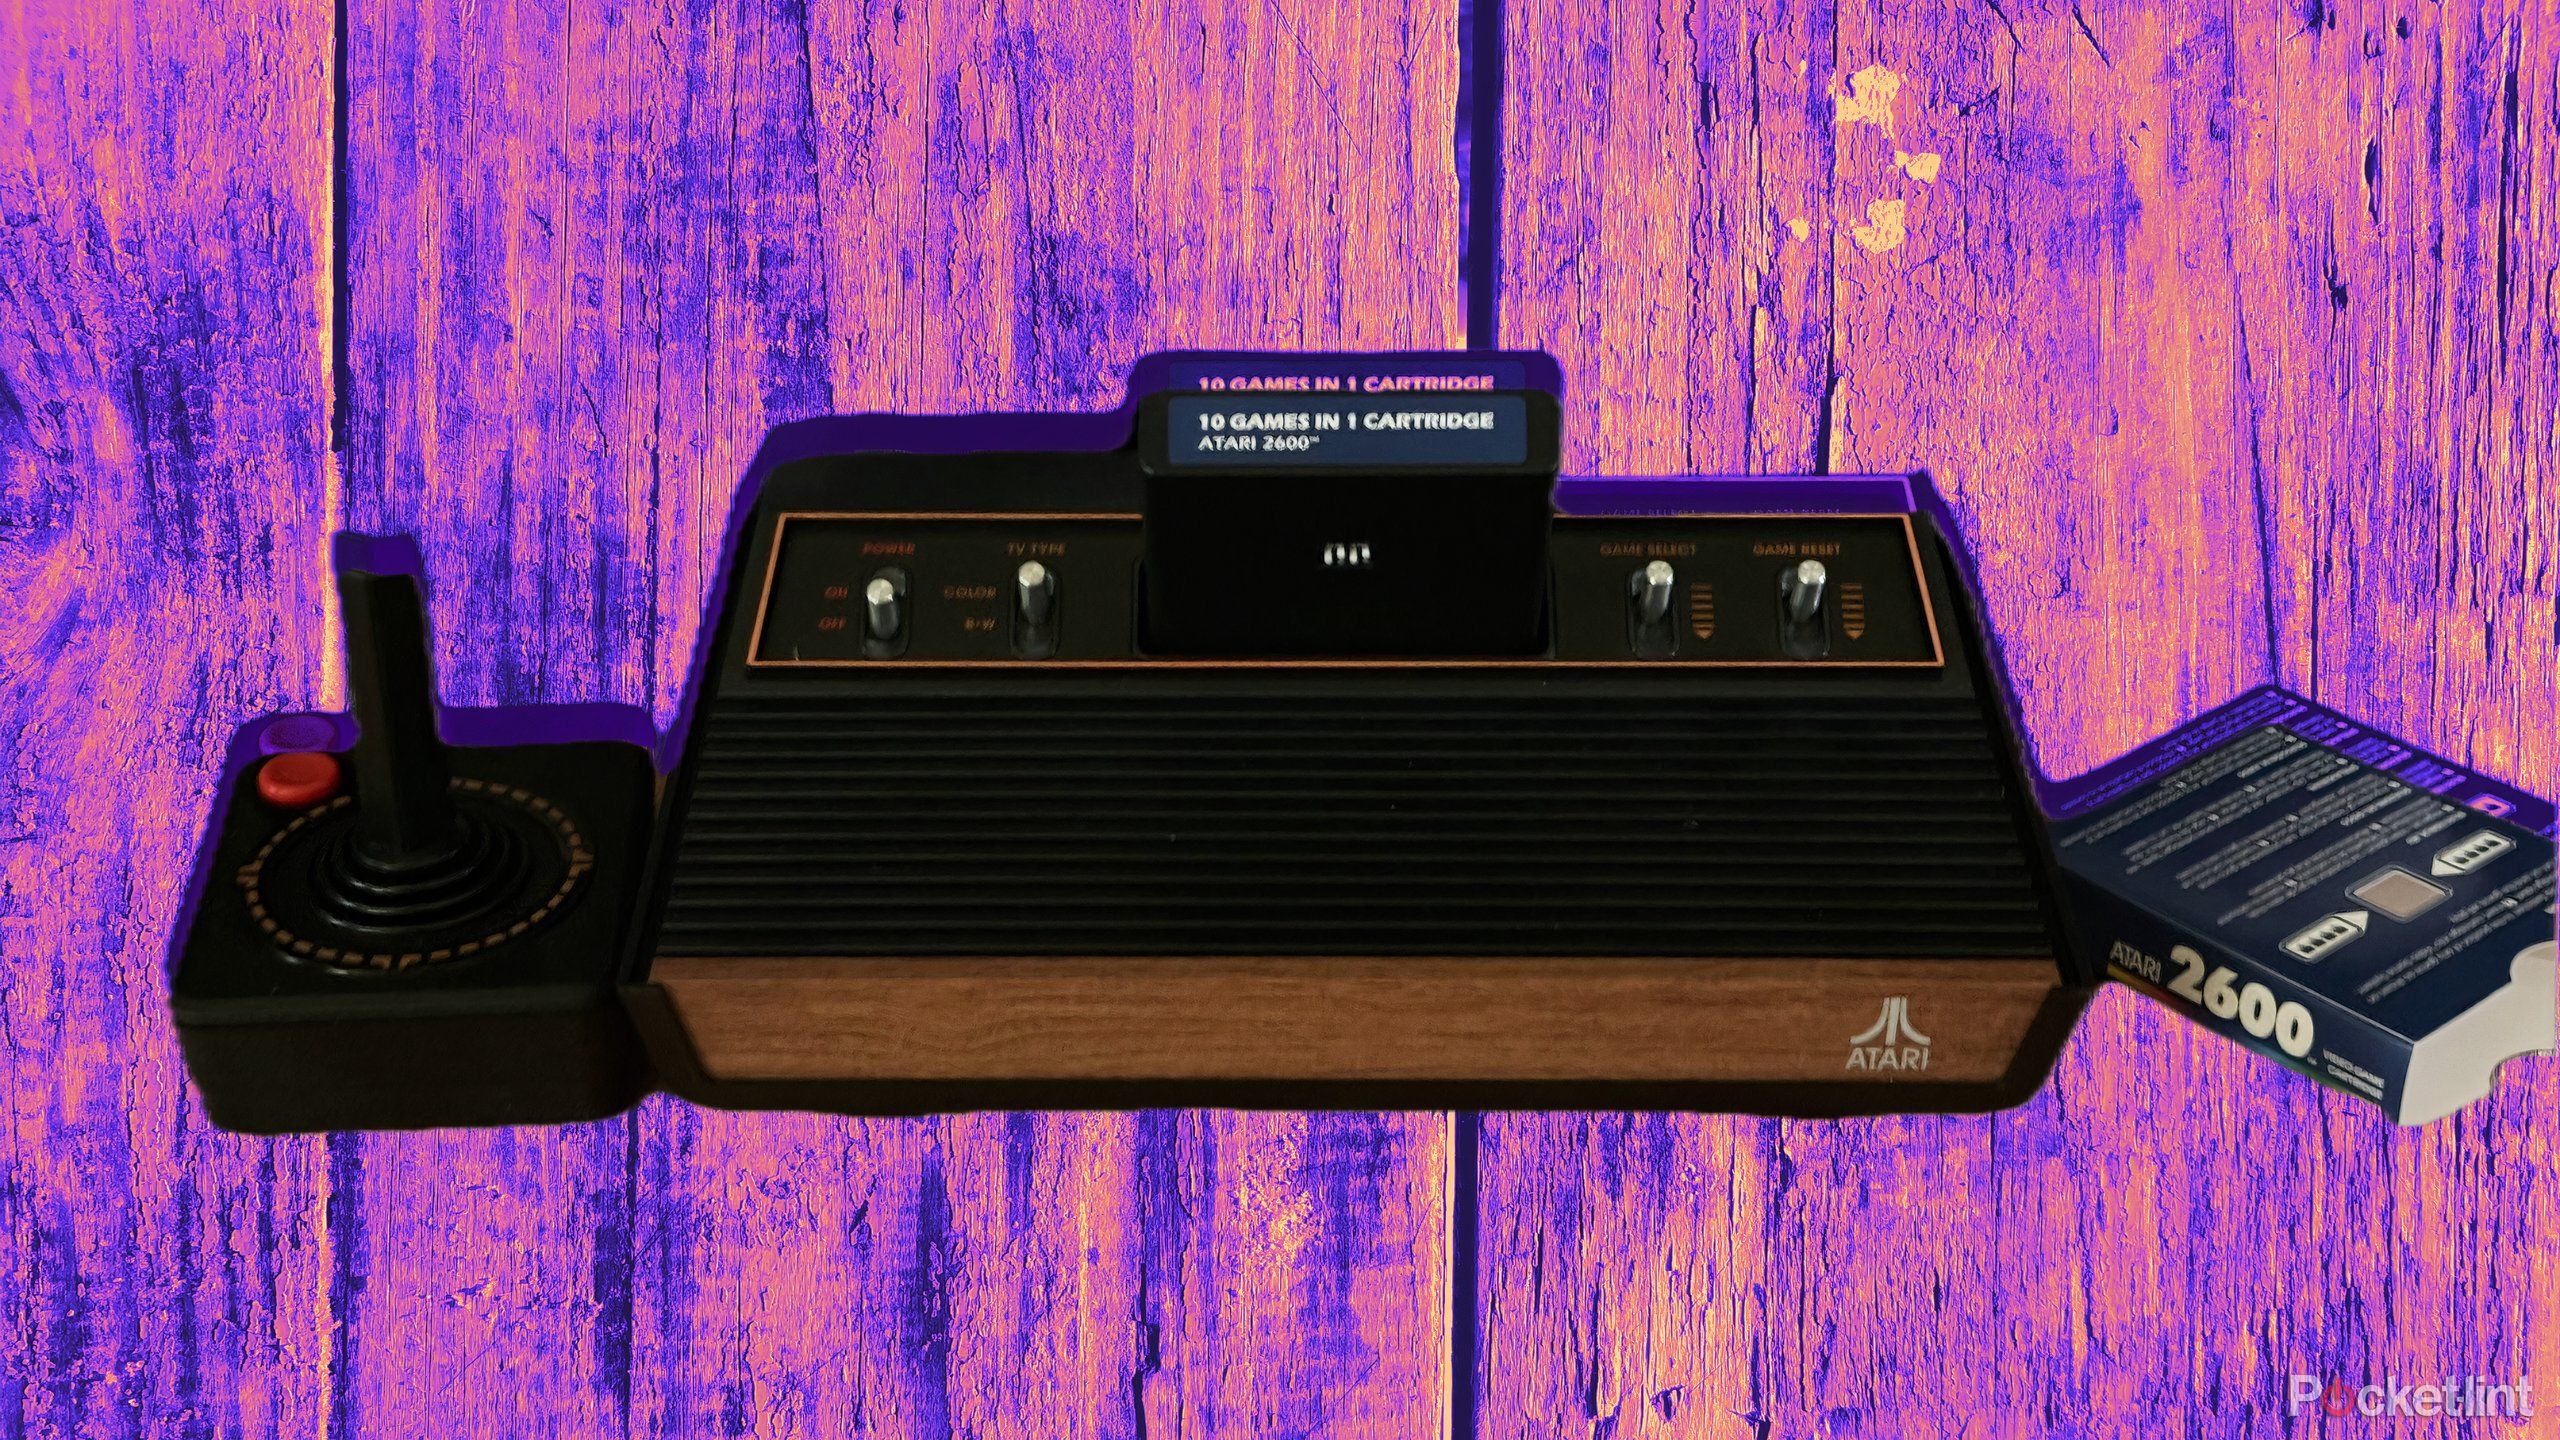 The Atari 2600+ unlocked my nostalgia, but left the fun in the past